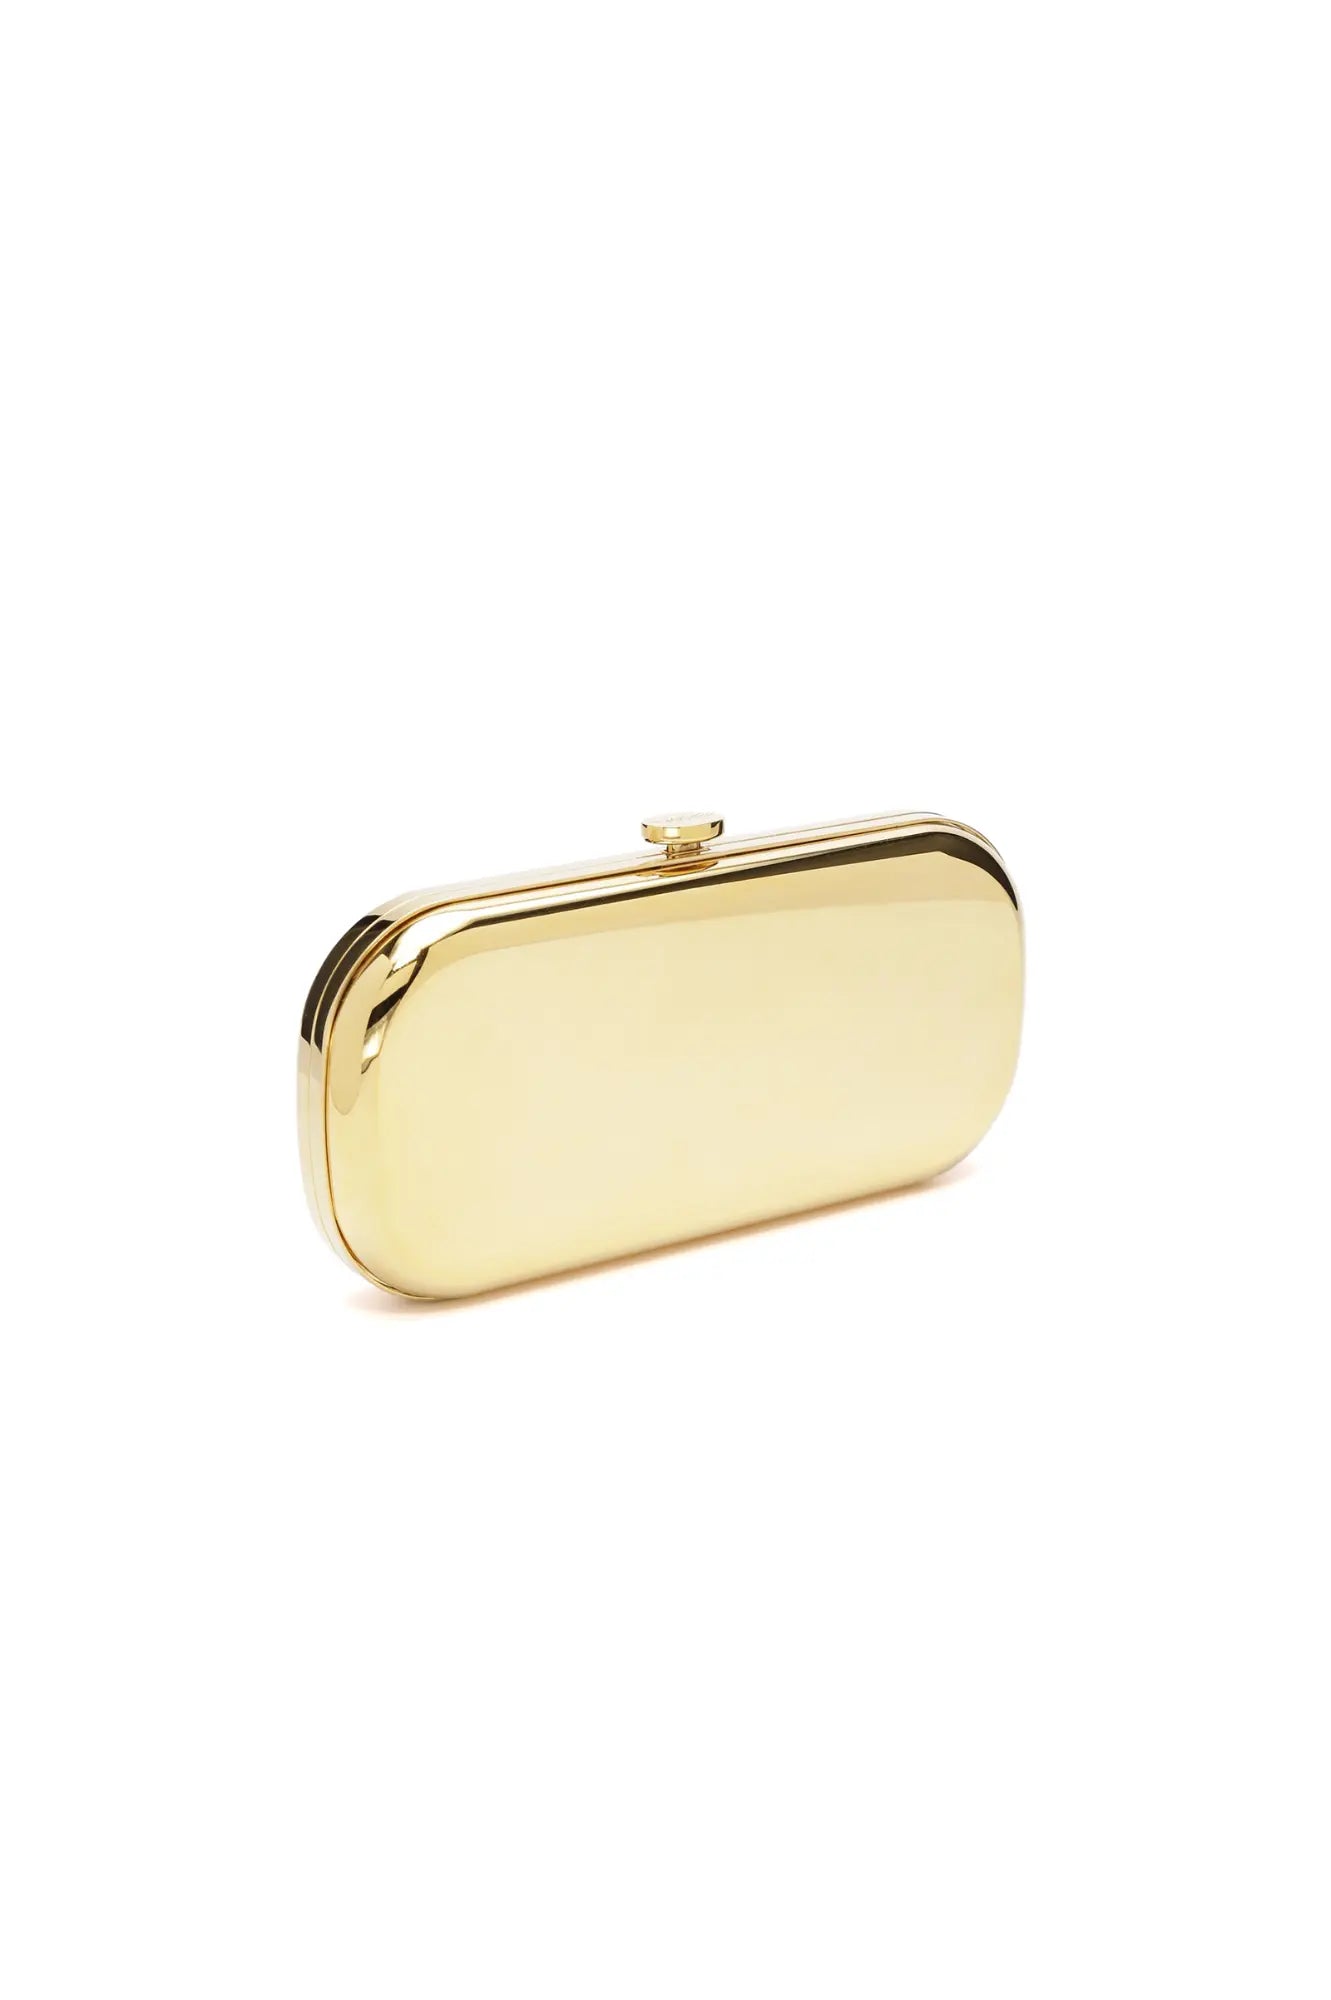 Gold-toned metallic Bella Clutch Golden Petite from The Bella Rosa Collection on a white background.